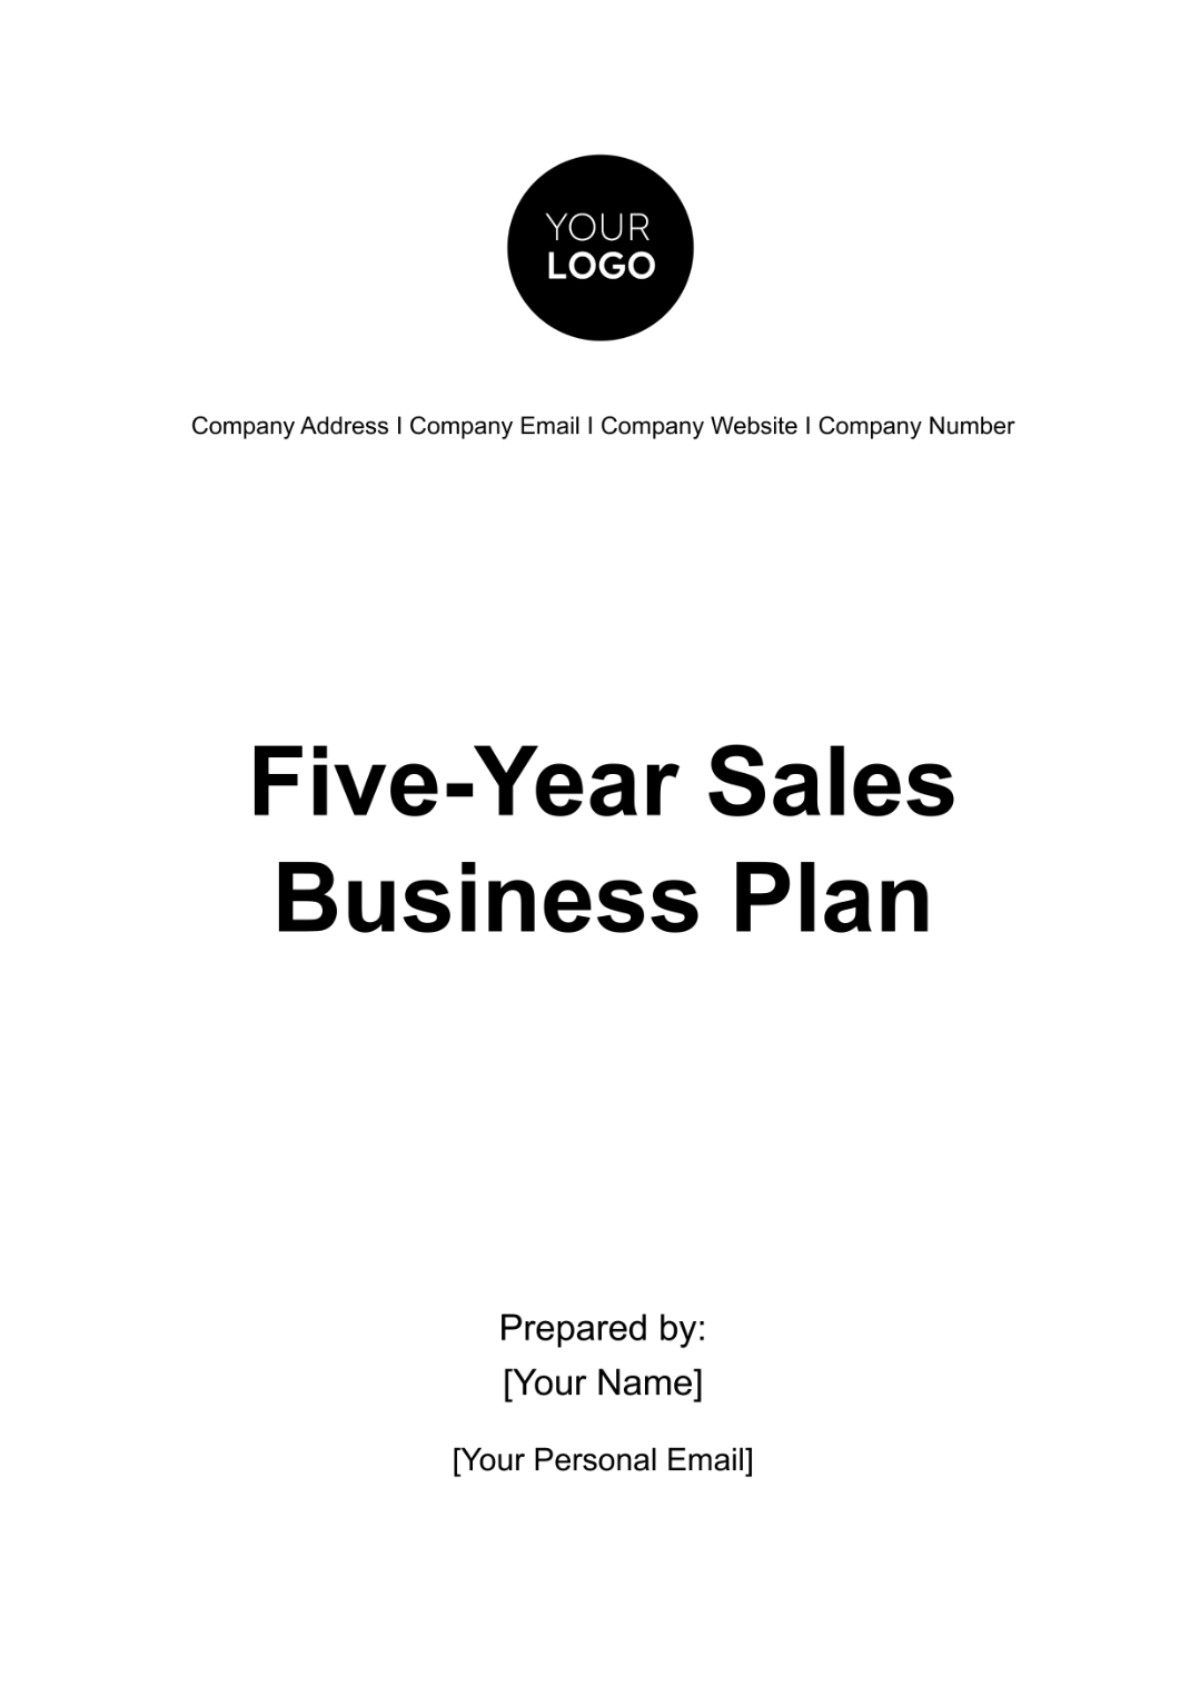 Free Five-Year Sales Business Plan Template